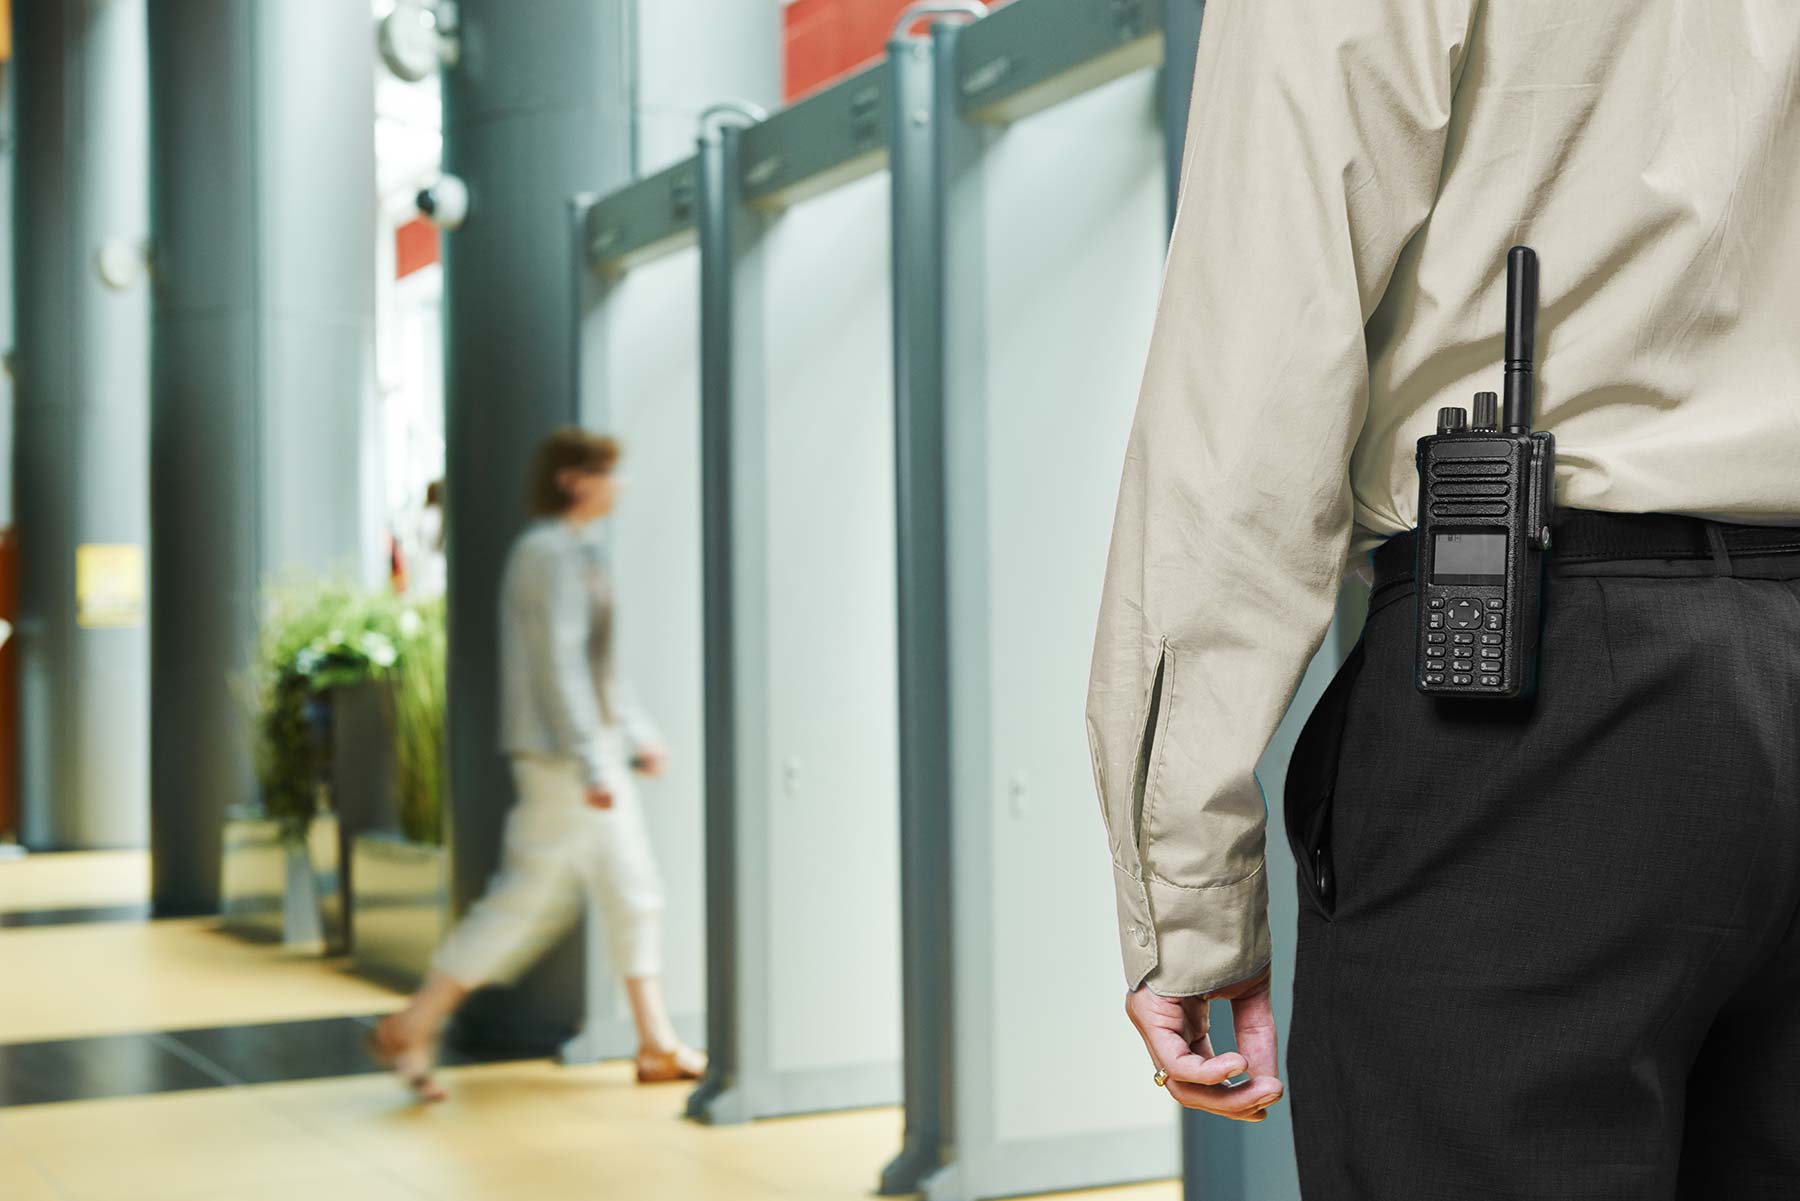 More than other Security Guards and Companies | Our employees are more than the average security | Give us a call today for a free security consultation with one of our knowledgeable professionals | Tempe Tucson Surprise Scottsdale Chandler Gilbert Tolleson Glendale Mesa Goodyear Phoenix AZ, Aurora Joliet Romeoville Rosemont Bolingbrook Schaumburg Elwood Chicago Heights Elk Grove Village IL | Arizona Illinois Indiana